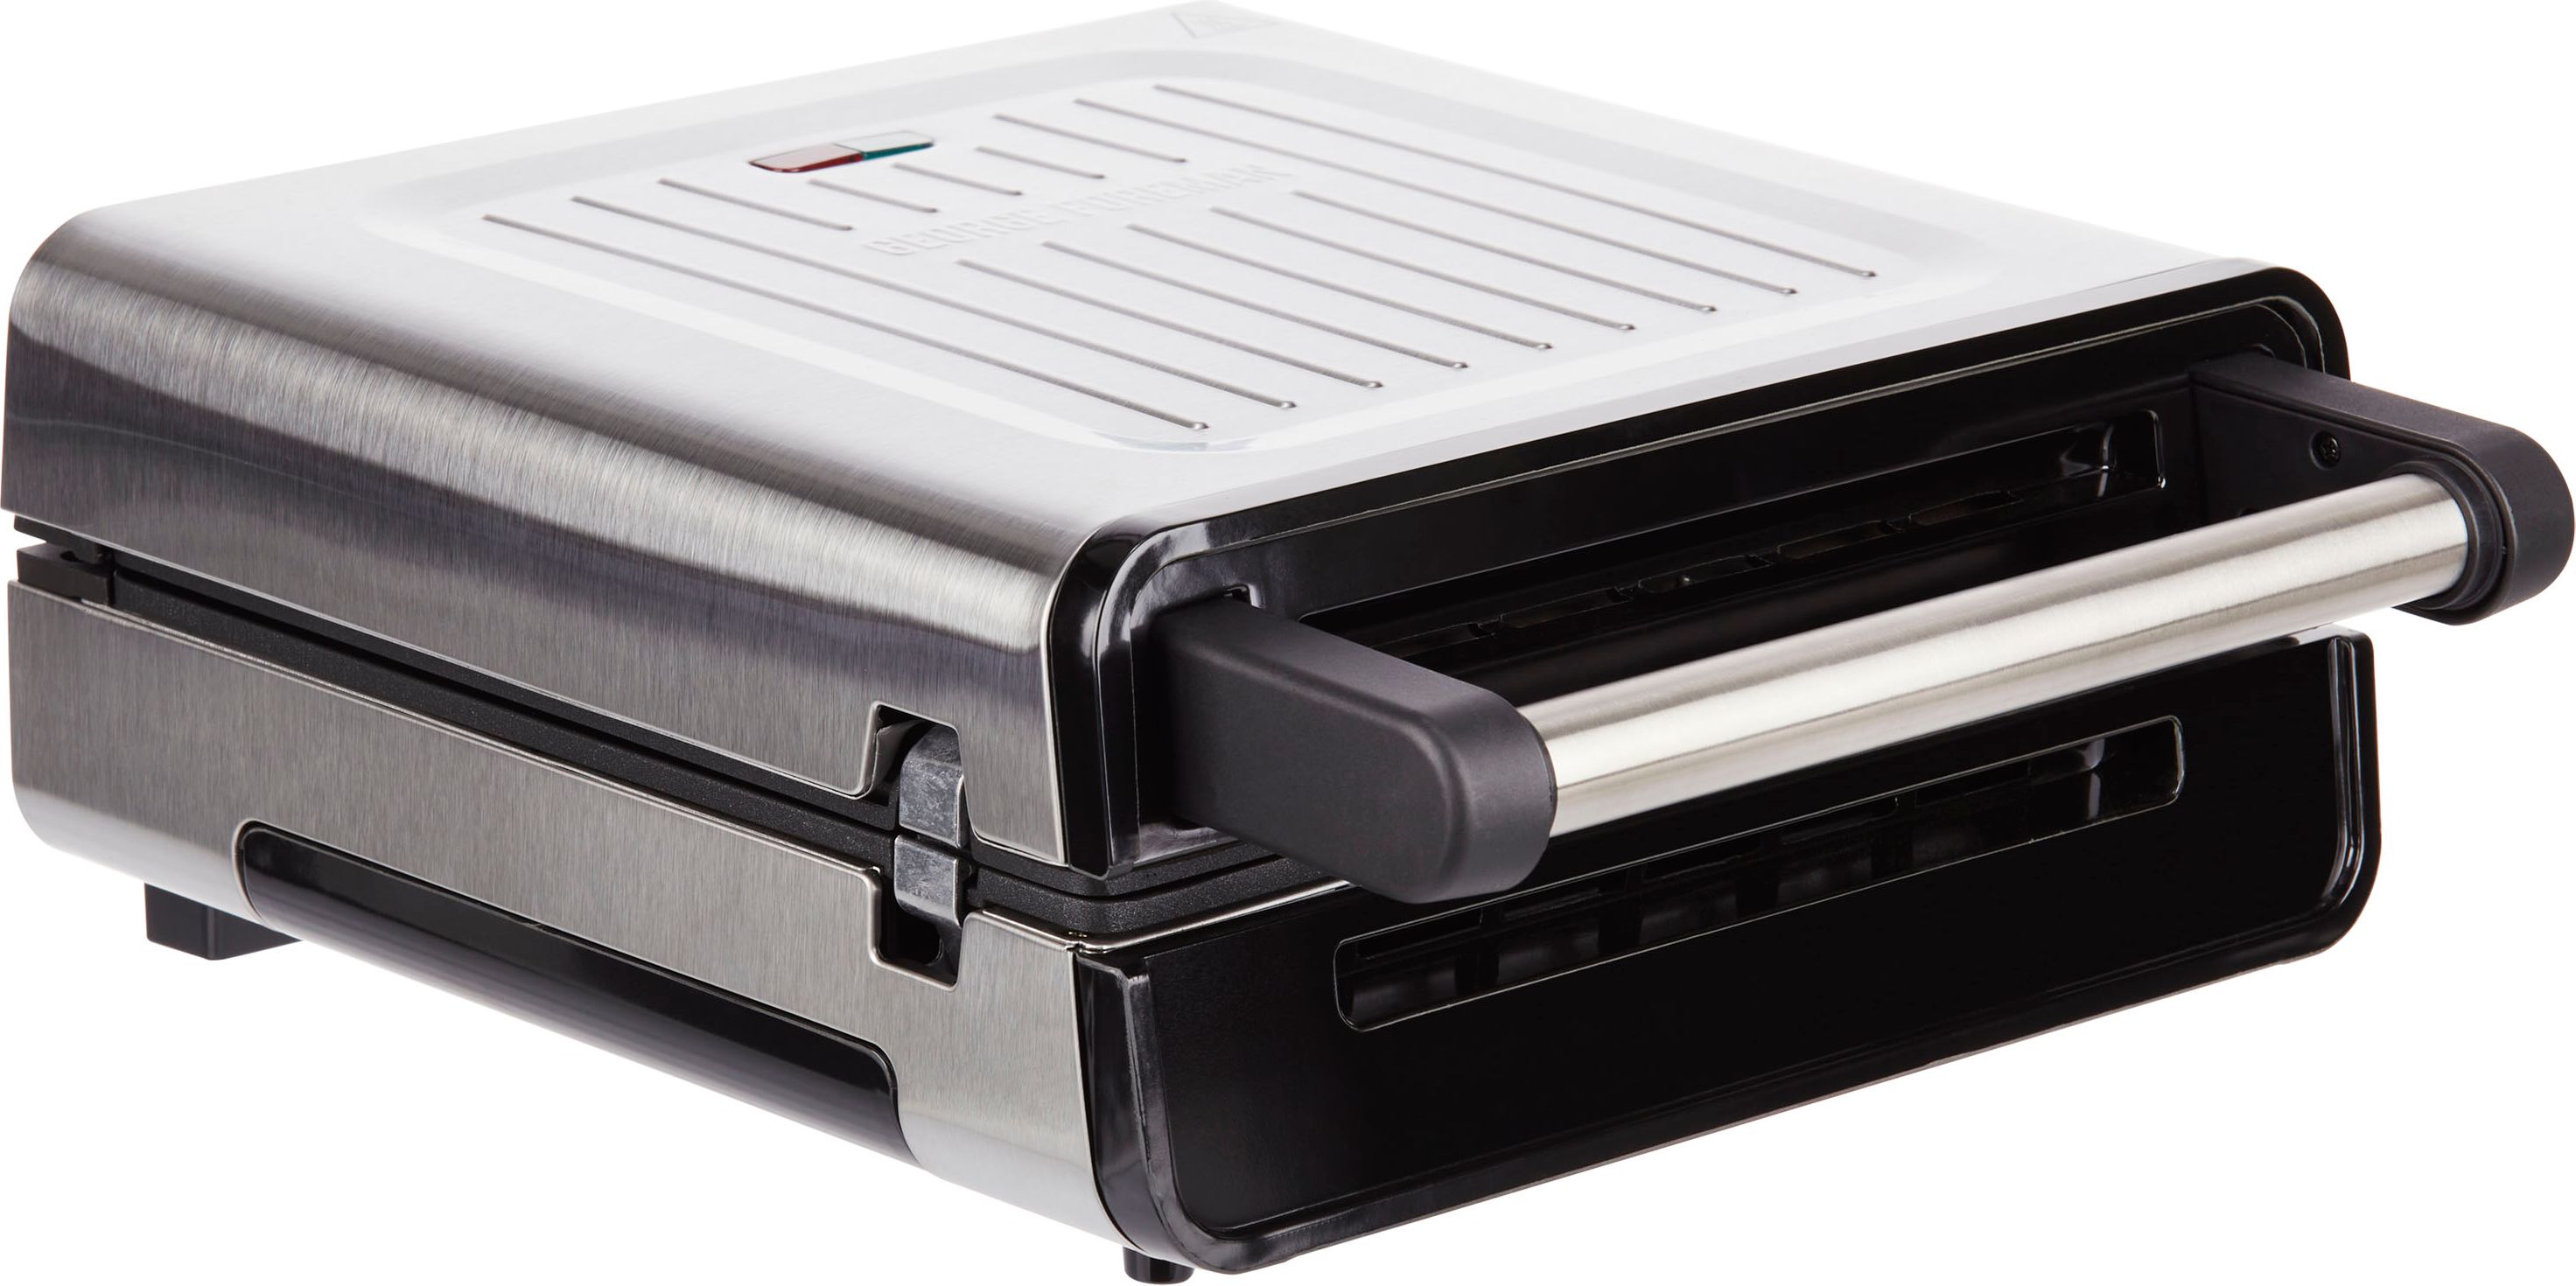 George Foreman 28000 Health Grill - Stainless Steel, Stainless Steel